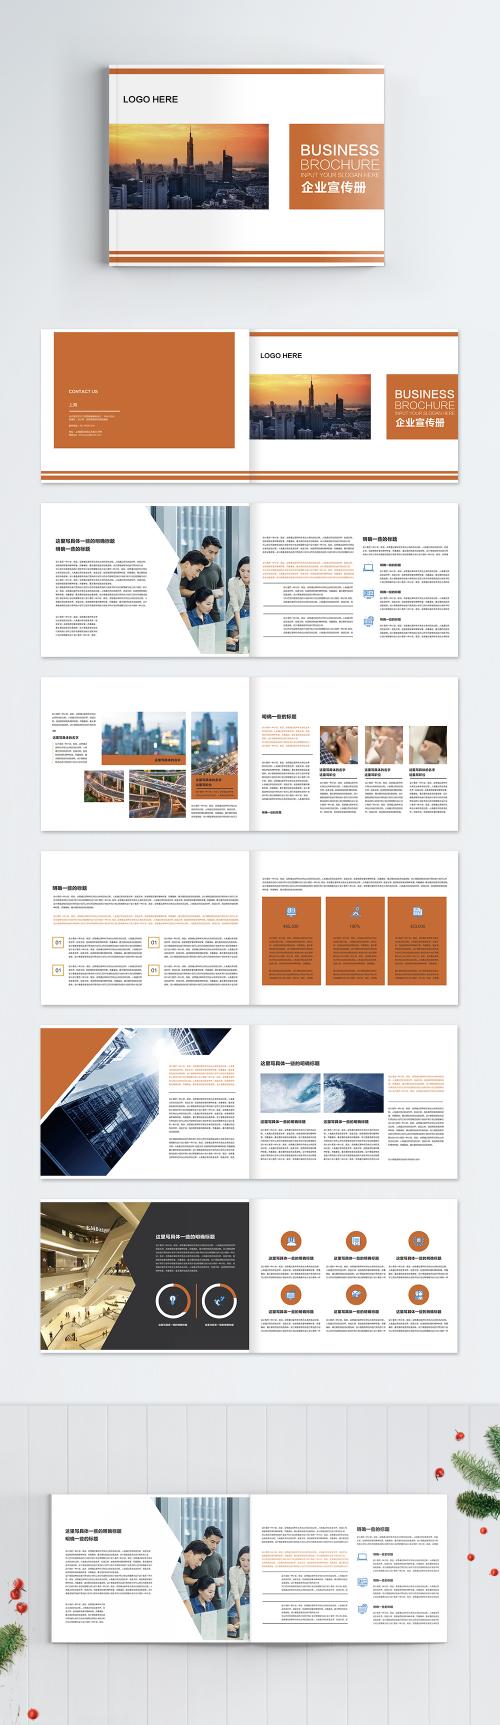 LovePik - a whole set of brochures for business groups - 400190999